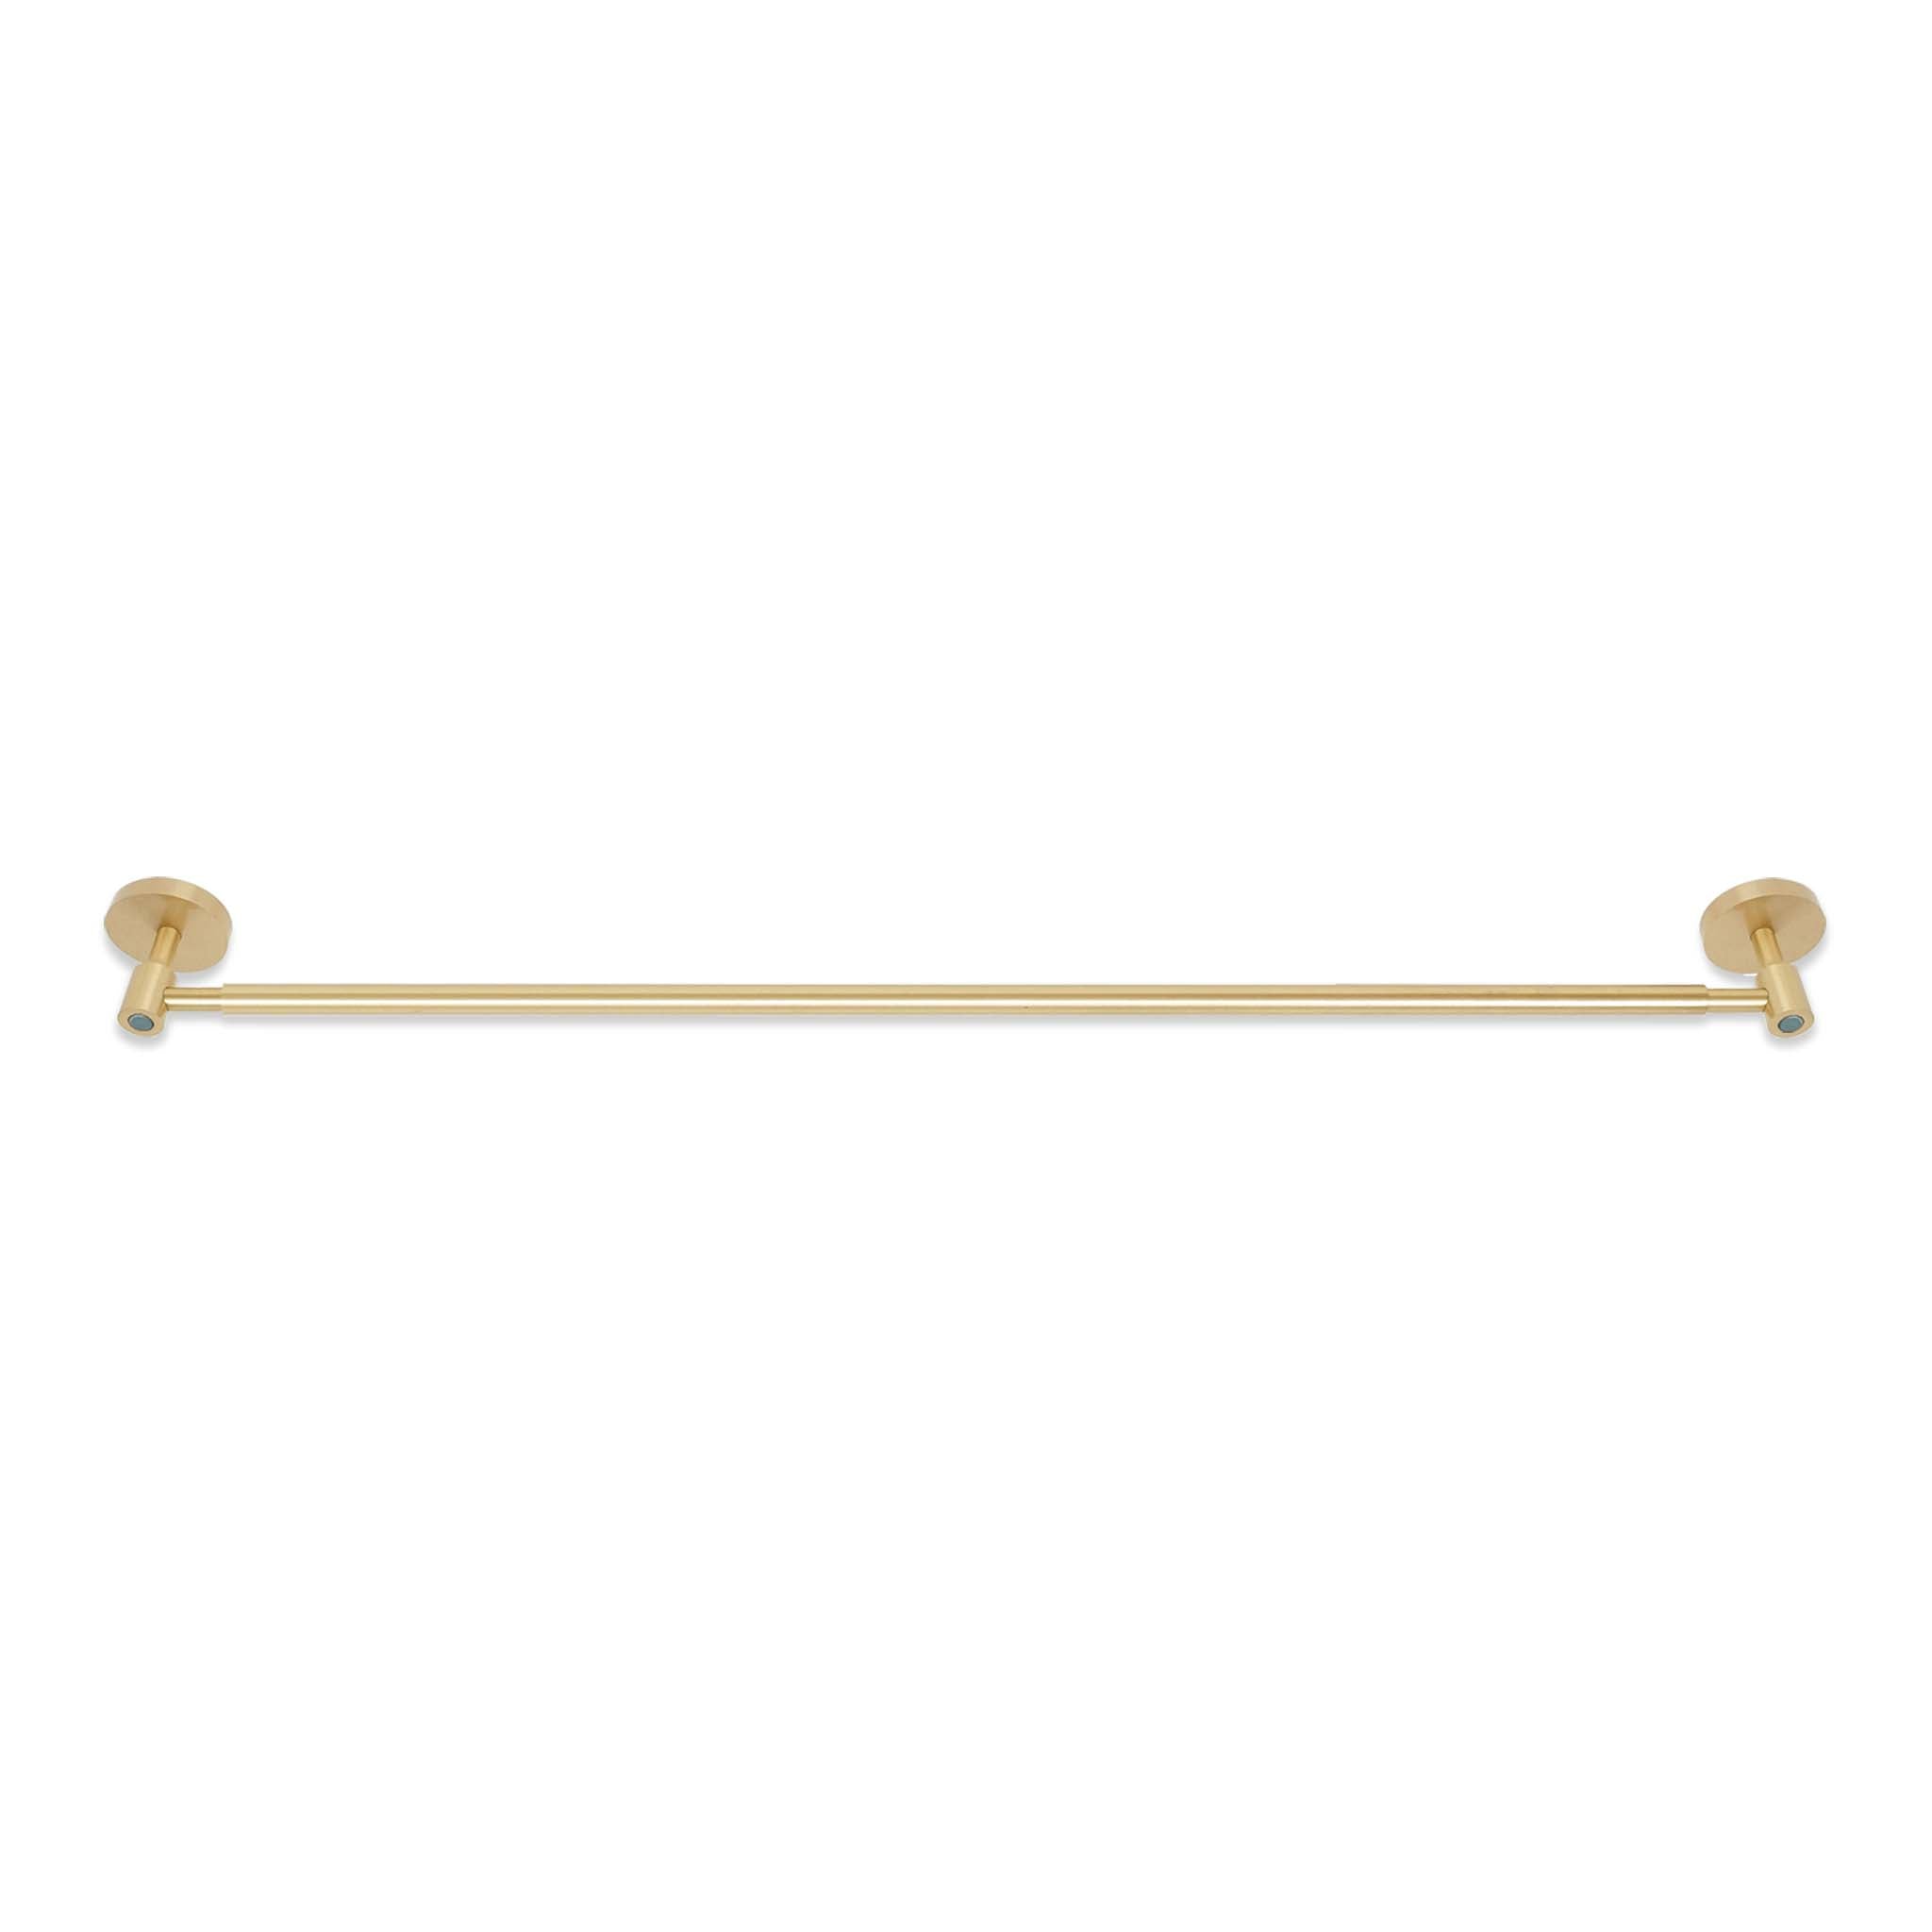 Brass and lagoon color Head towel bar 24" Dutton Brown hardware